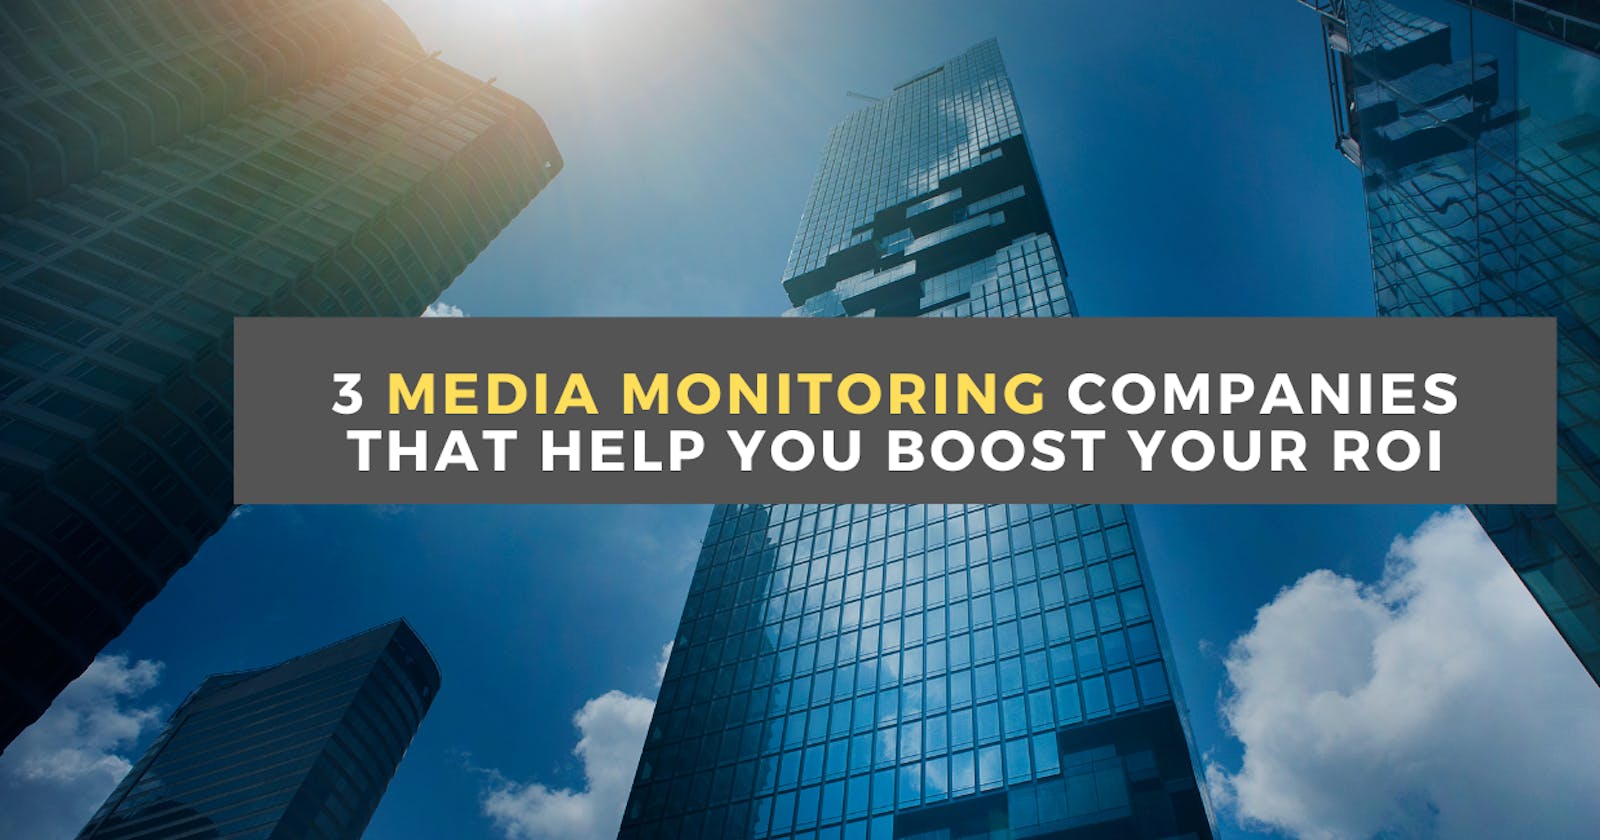 3 Media Monitoring Companies that Help You Boost Your ROI